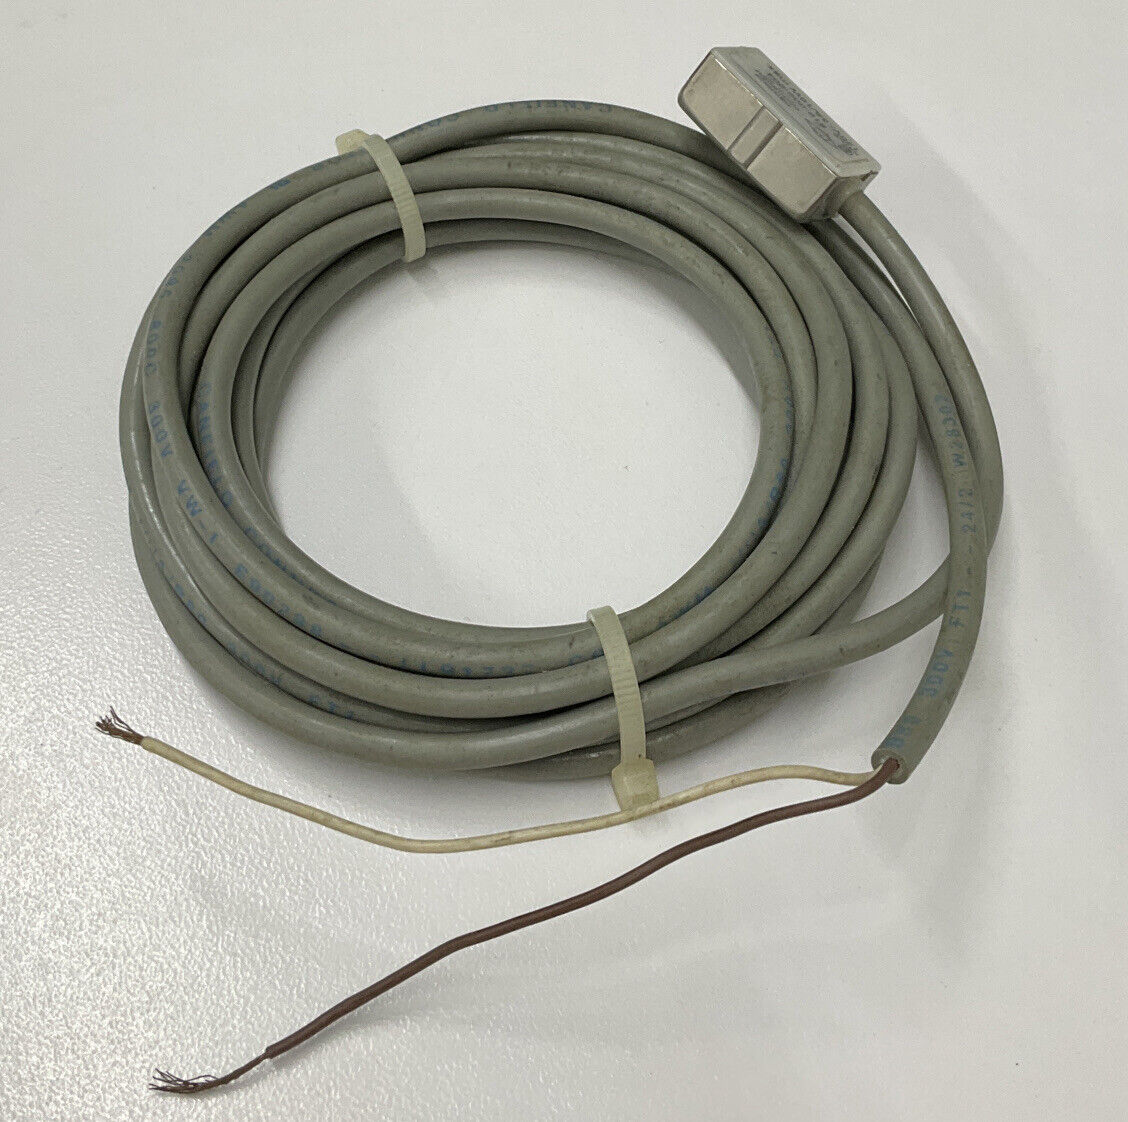 Canfield Connector 810-000-004 Reed Switch 120V (CL240)